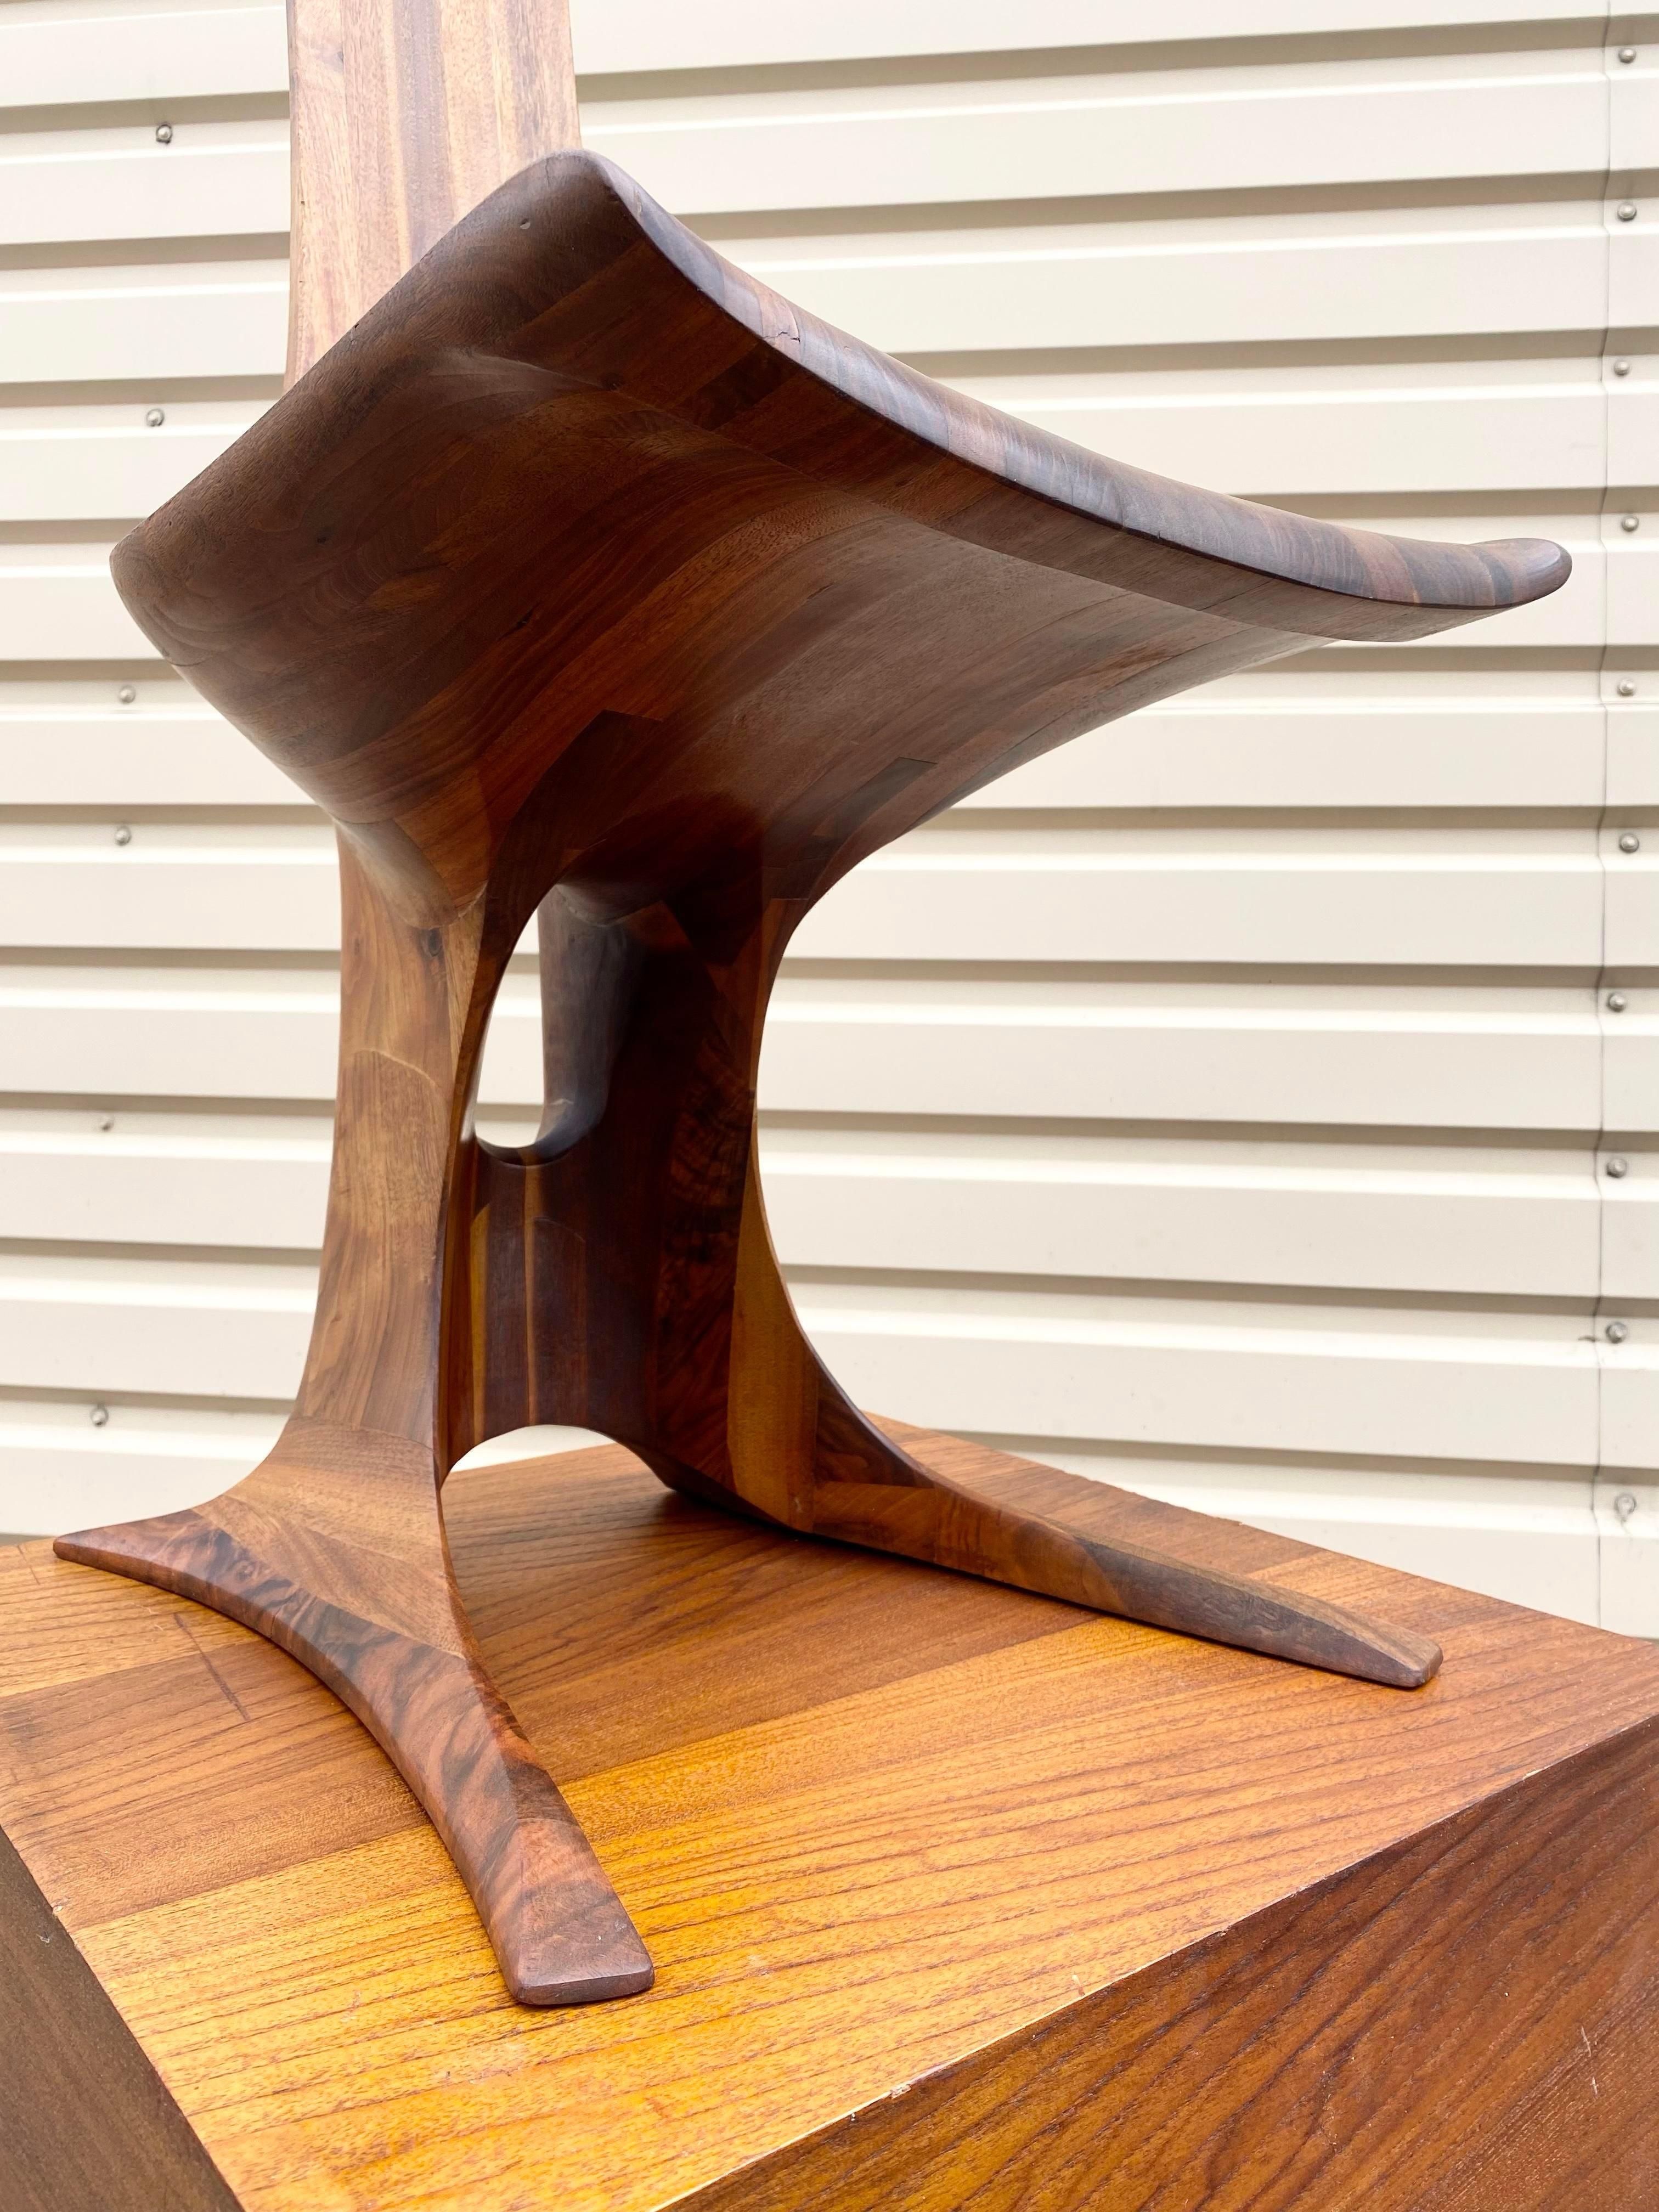 Modernist Sculptural Walnut Chair by Edward G. Livingston for Archotypo (1970) For Sale 1